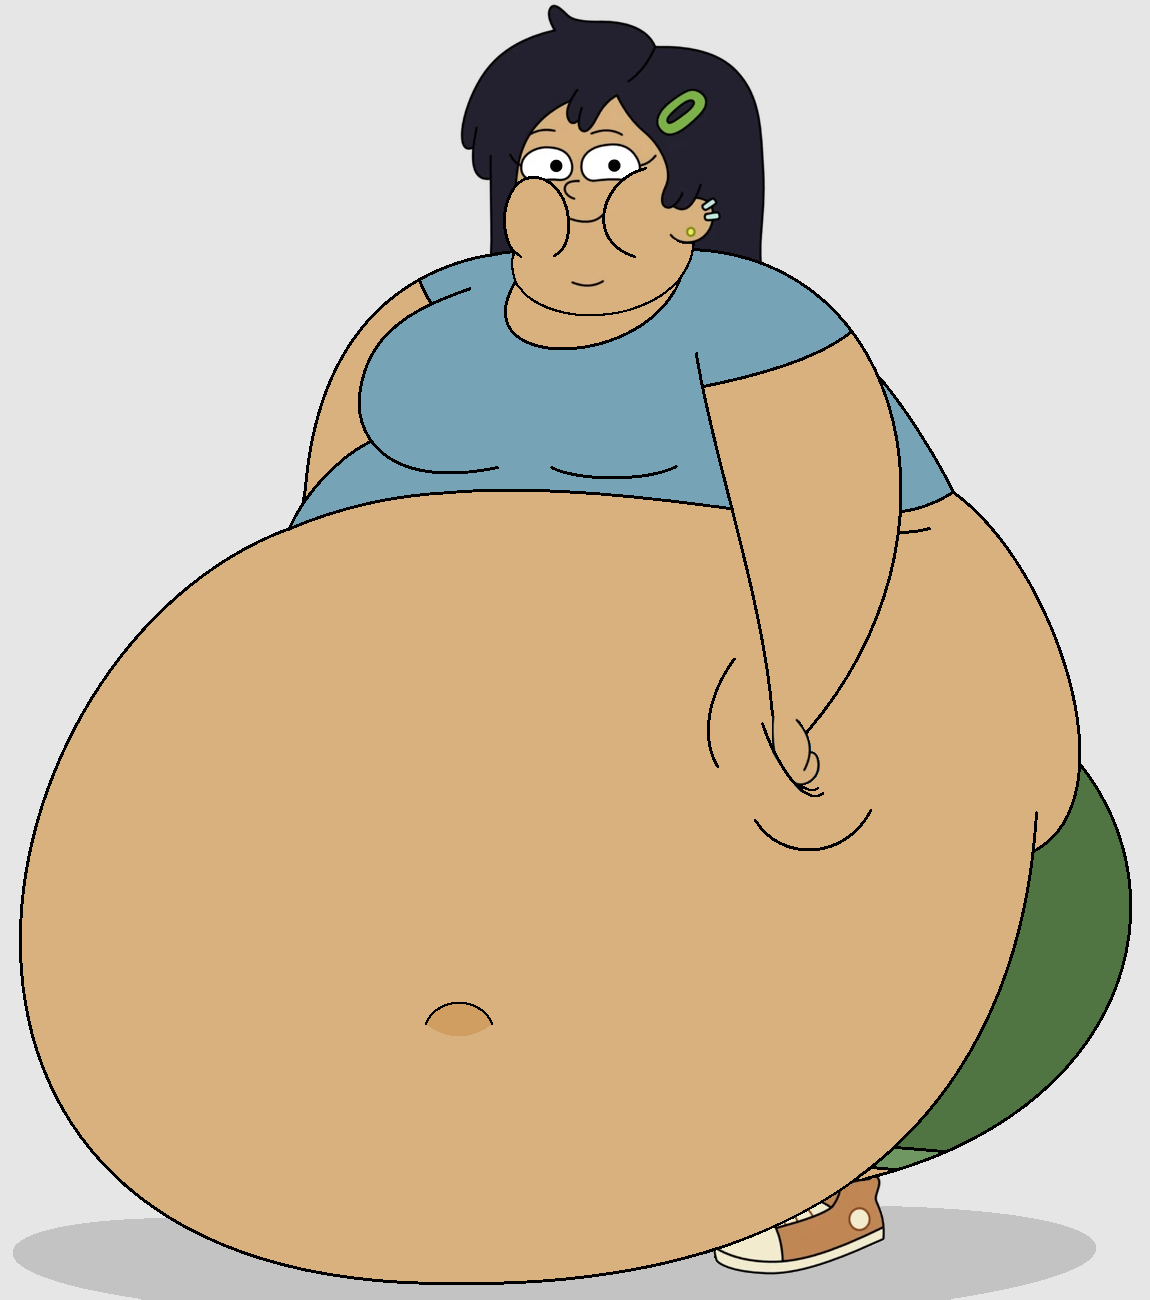 Only Fat Adult Marcy Wu By Roquemi On Deviantart